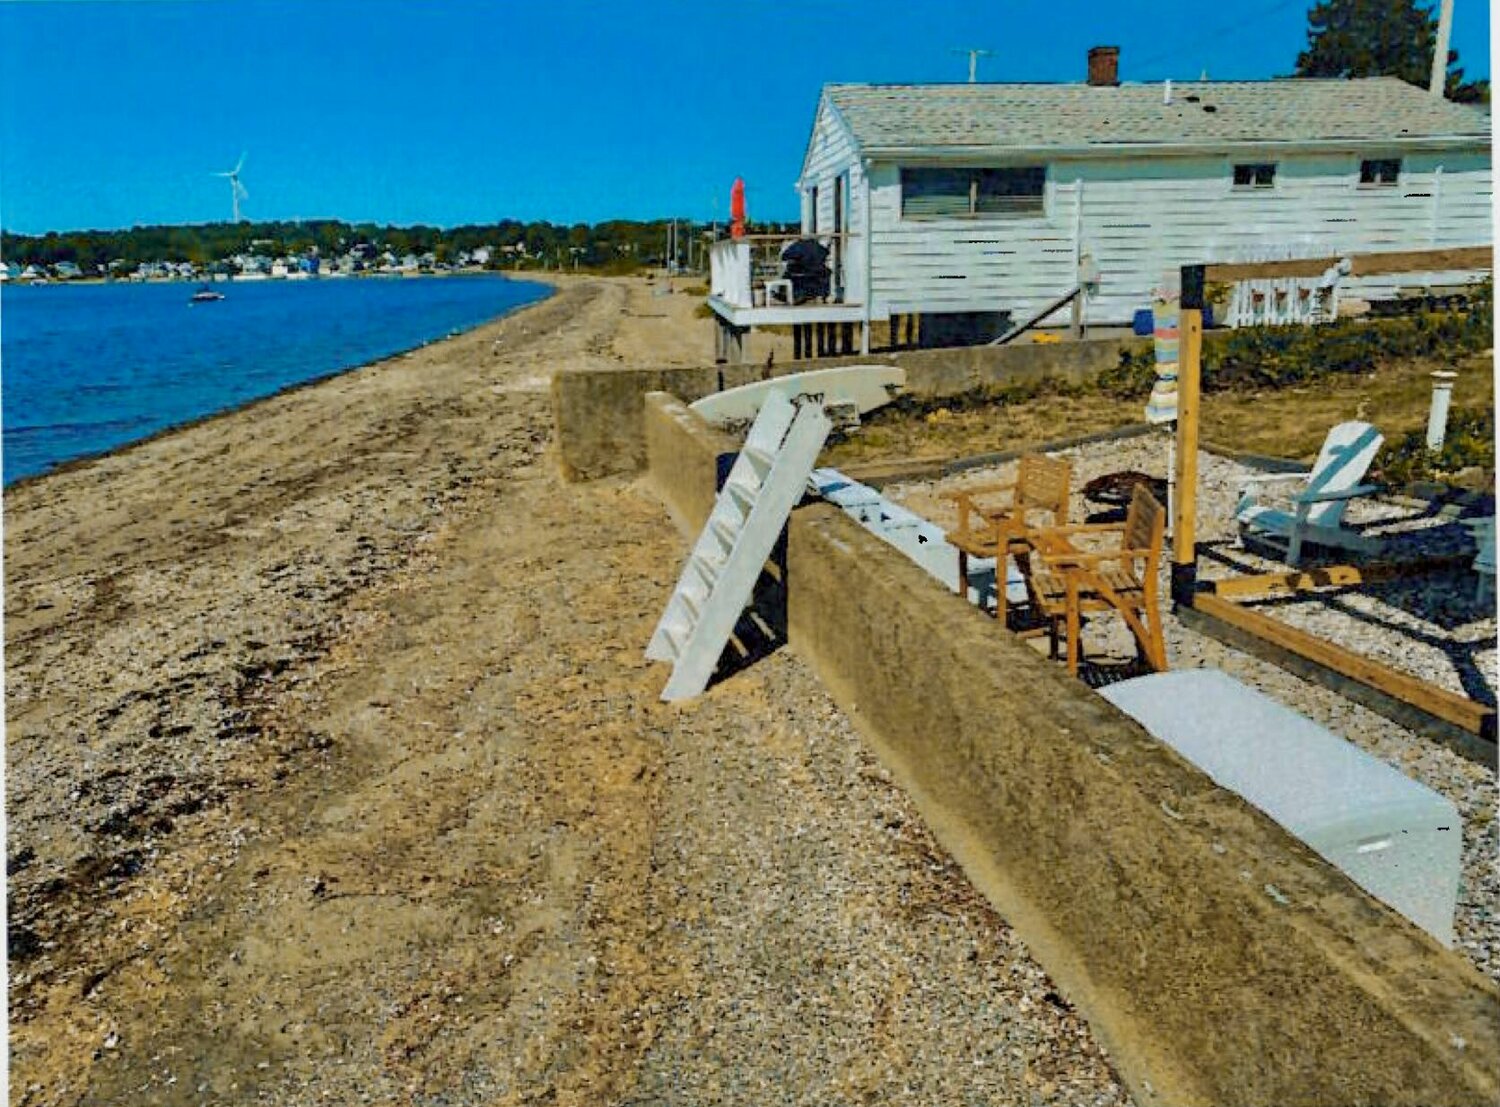 Photo included in CRMC application shows where Mark and Cheryl DeMello are proposing to build a residential floating dock behind 395 Park Ave. Council member Charles Levesque, who said he’s not opposed to the specific application but wanted a wider discussion about “lateral access” along the shoreline, noted it would be the only such dock in the immediate area.